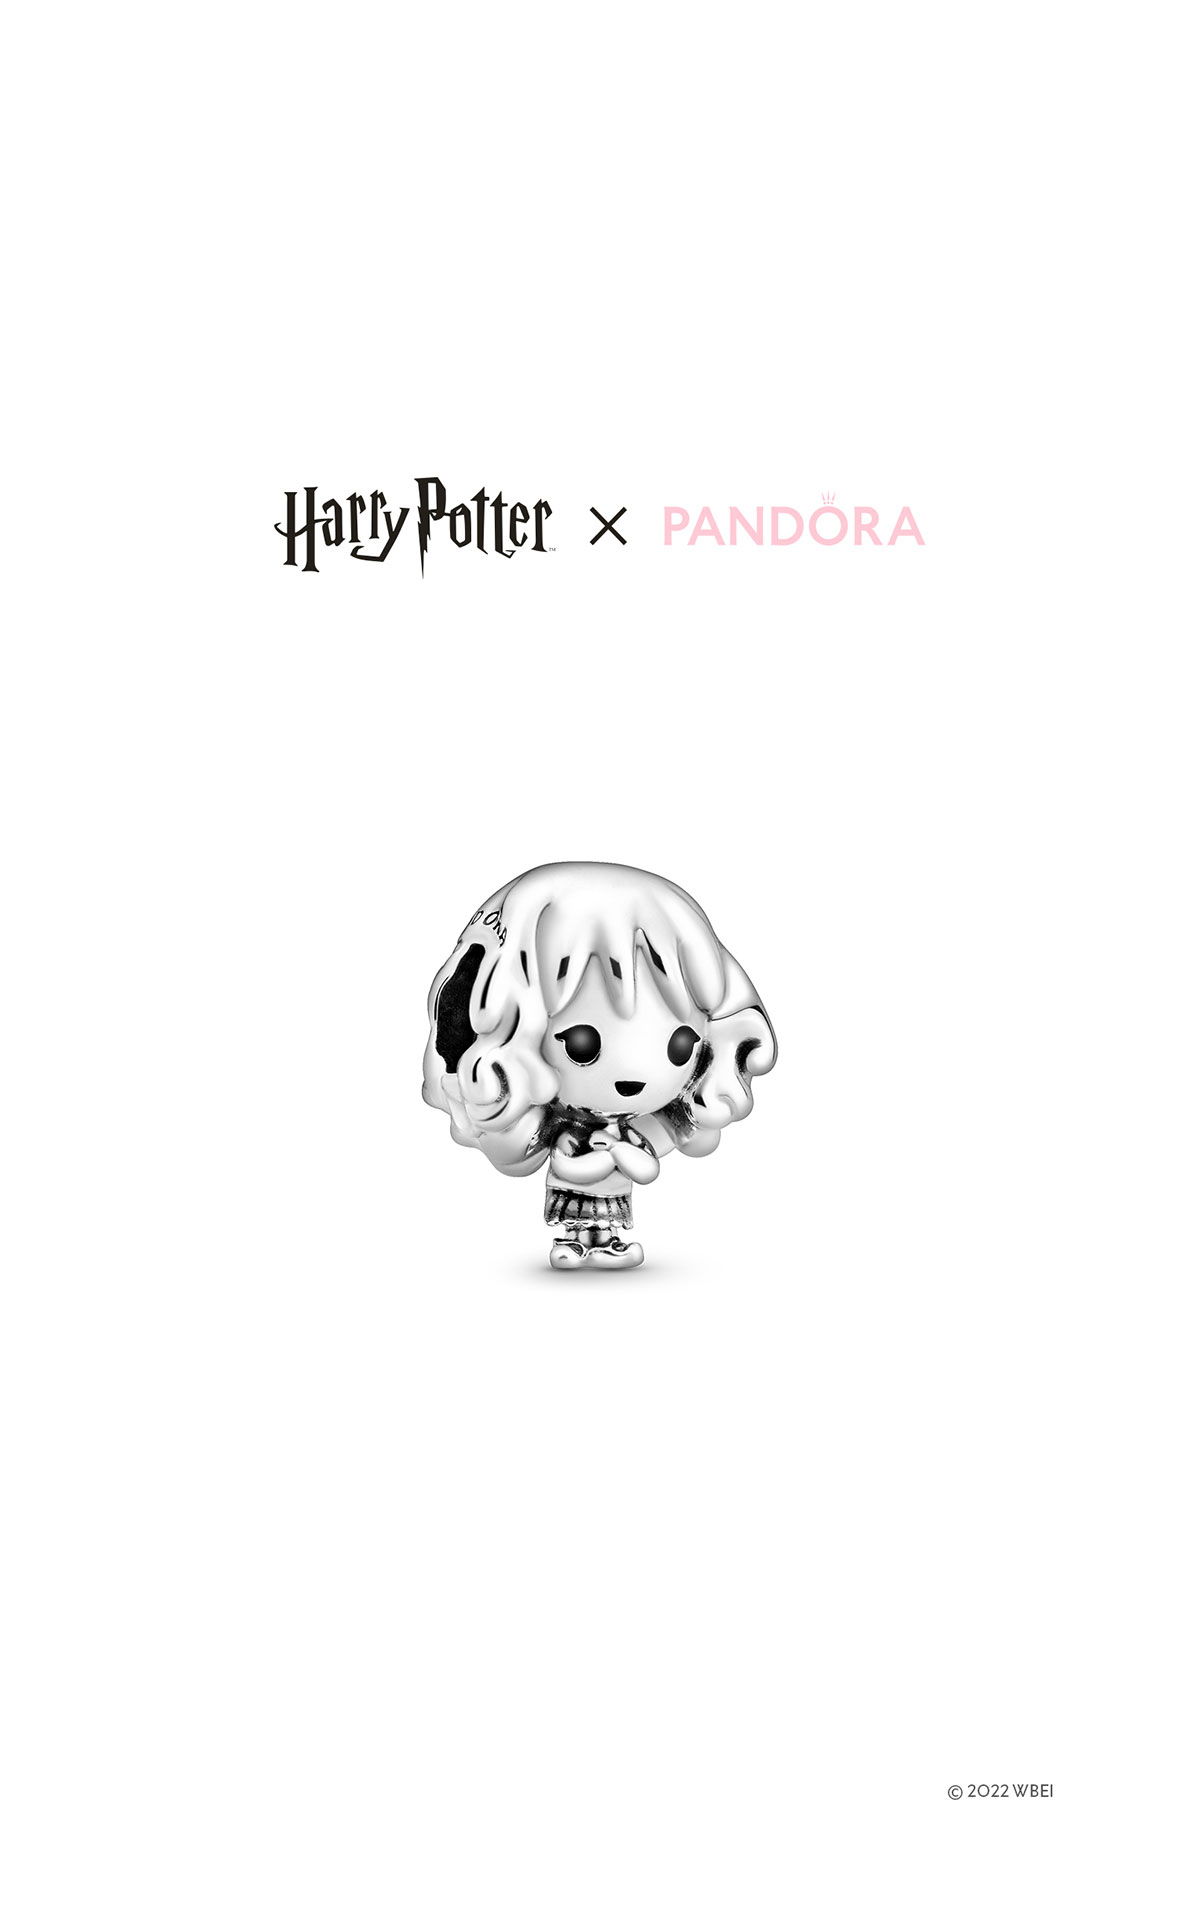 Pandora Harry Potter Heromine character from Bicester Village